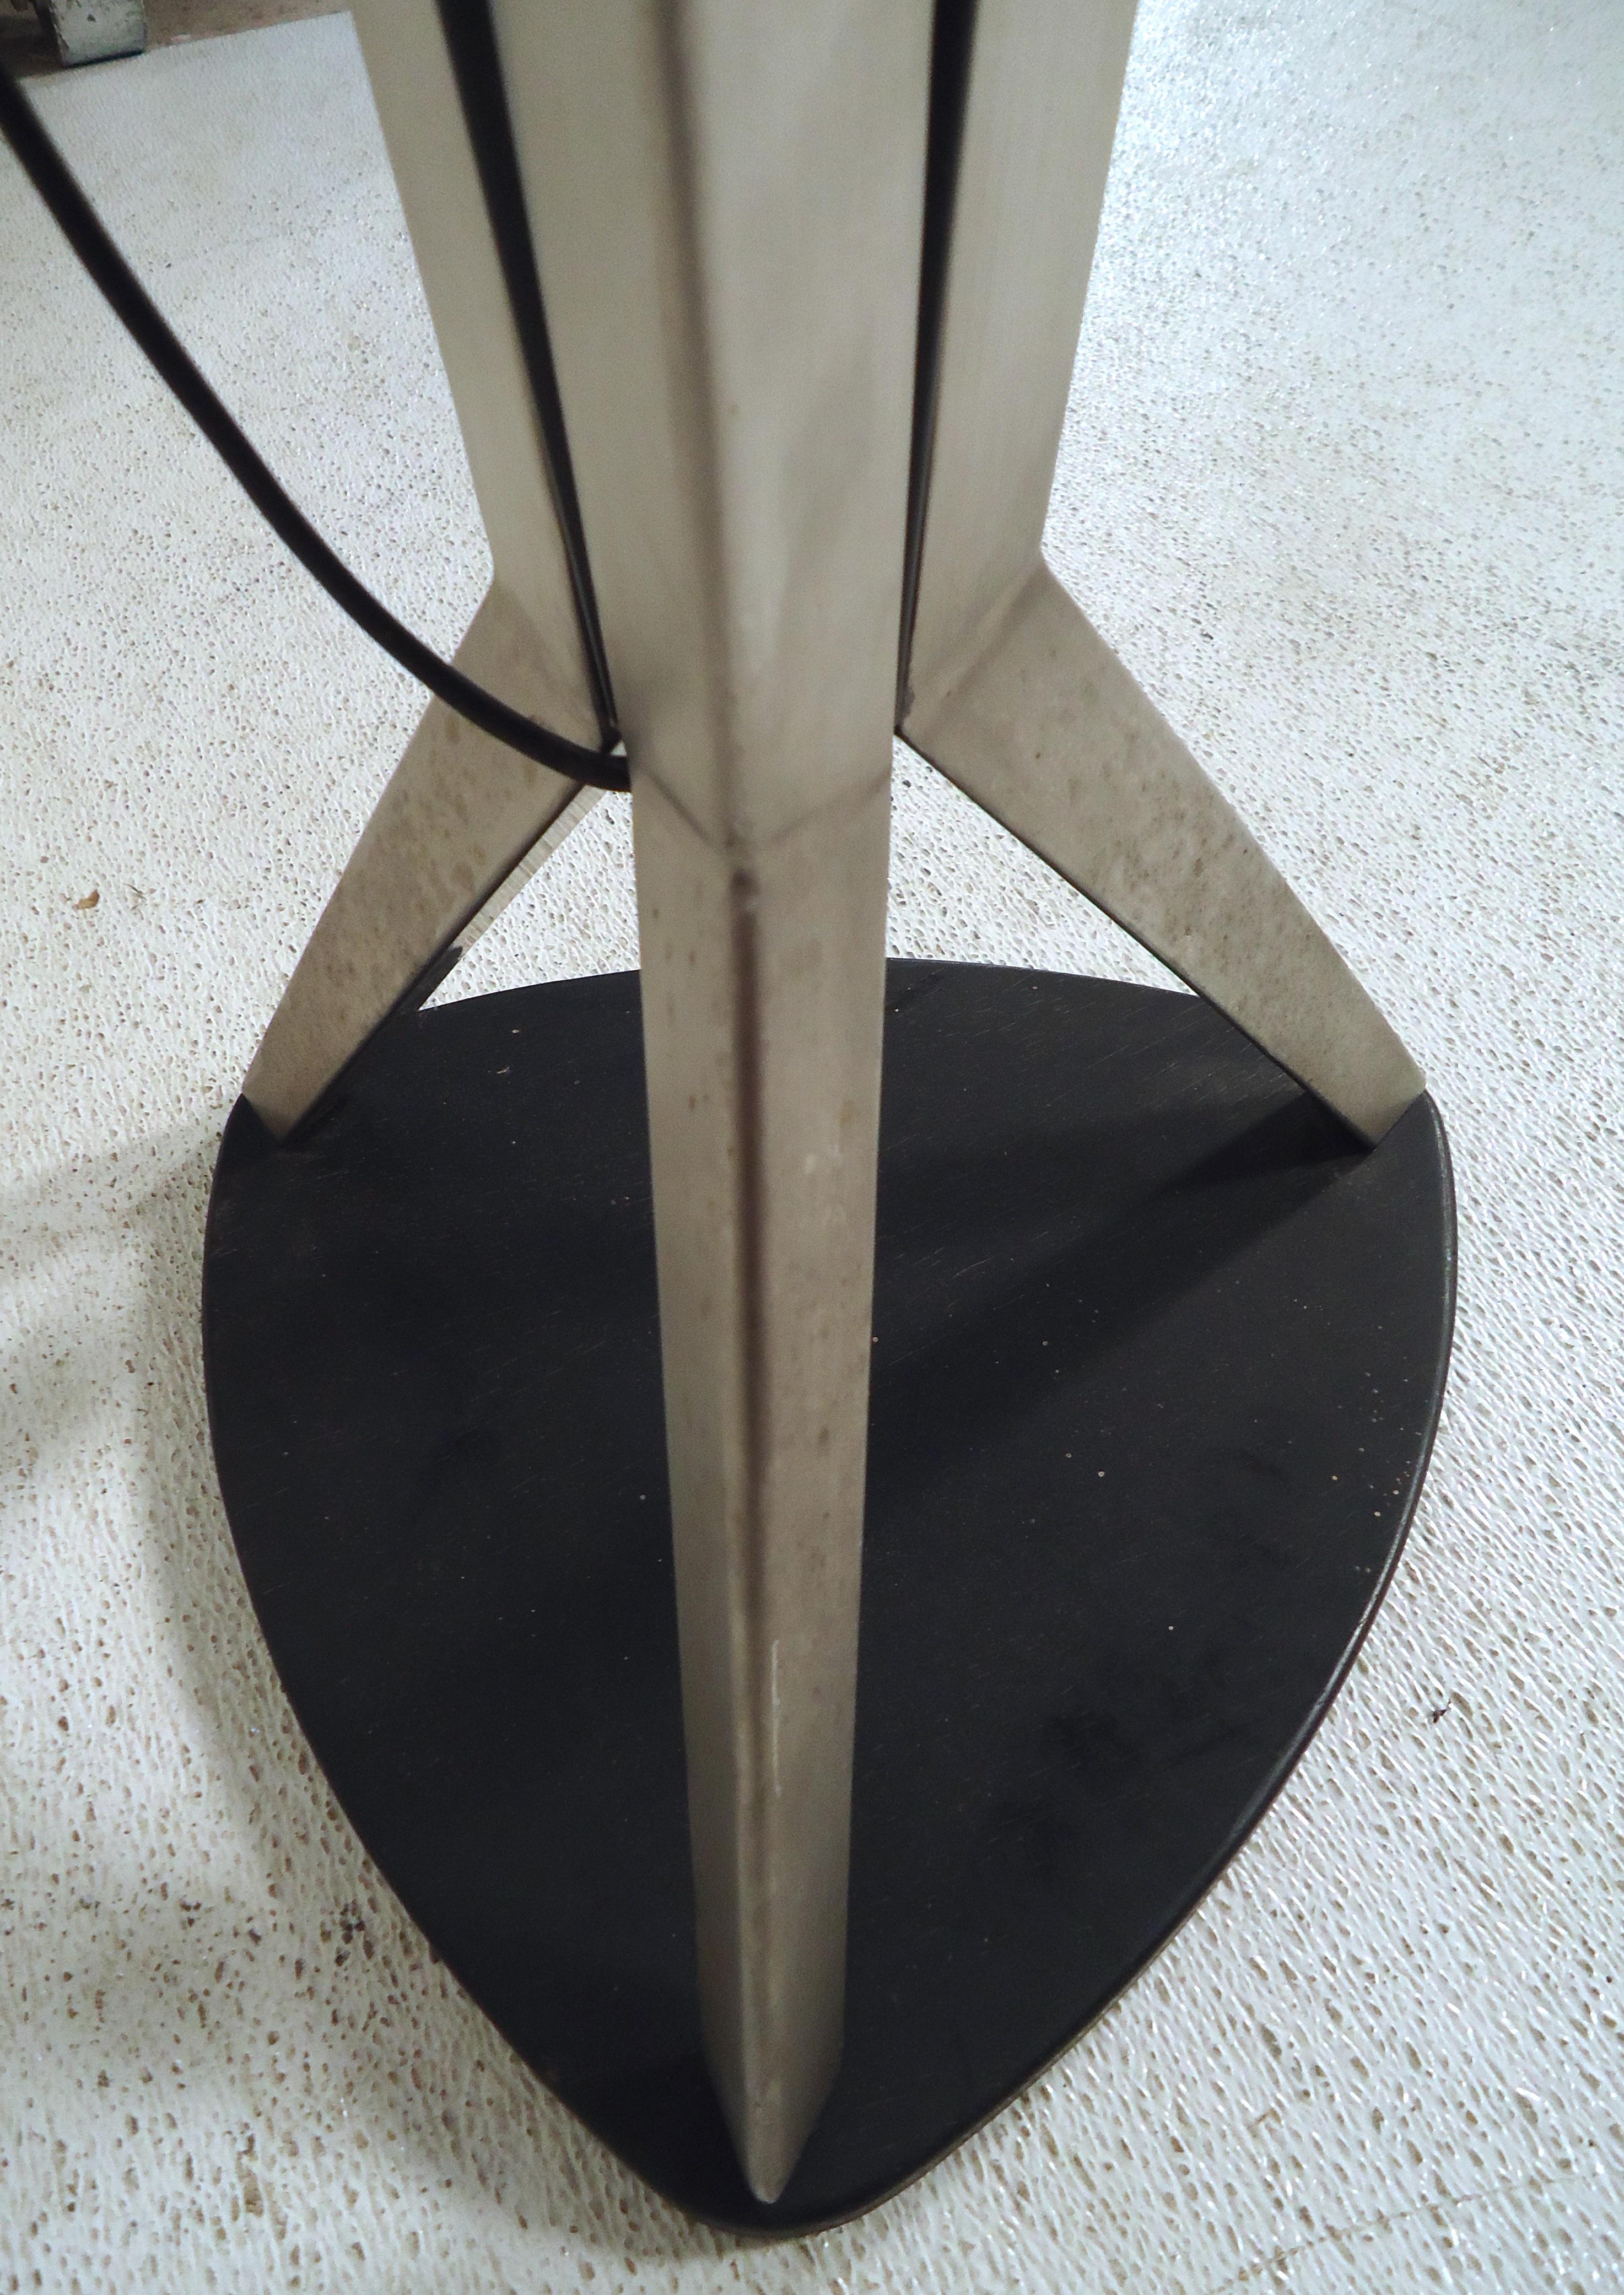 Vintage Modern Stainless Steel Floor Lamp In Good Condition For Sale In Brooklyn, NY